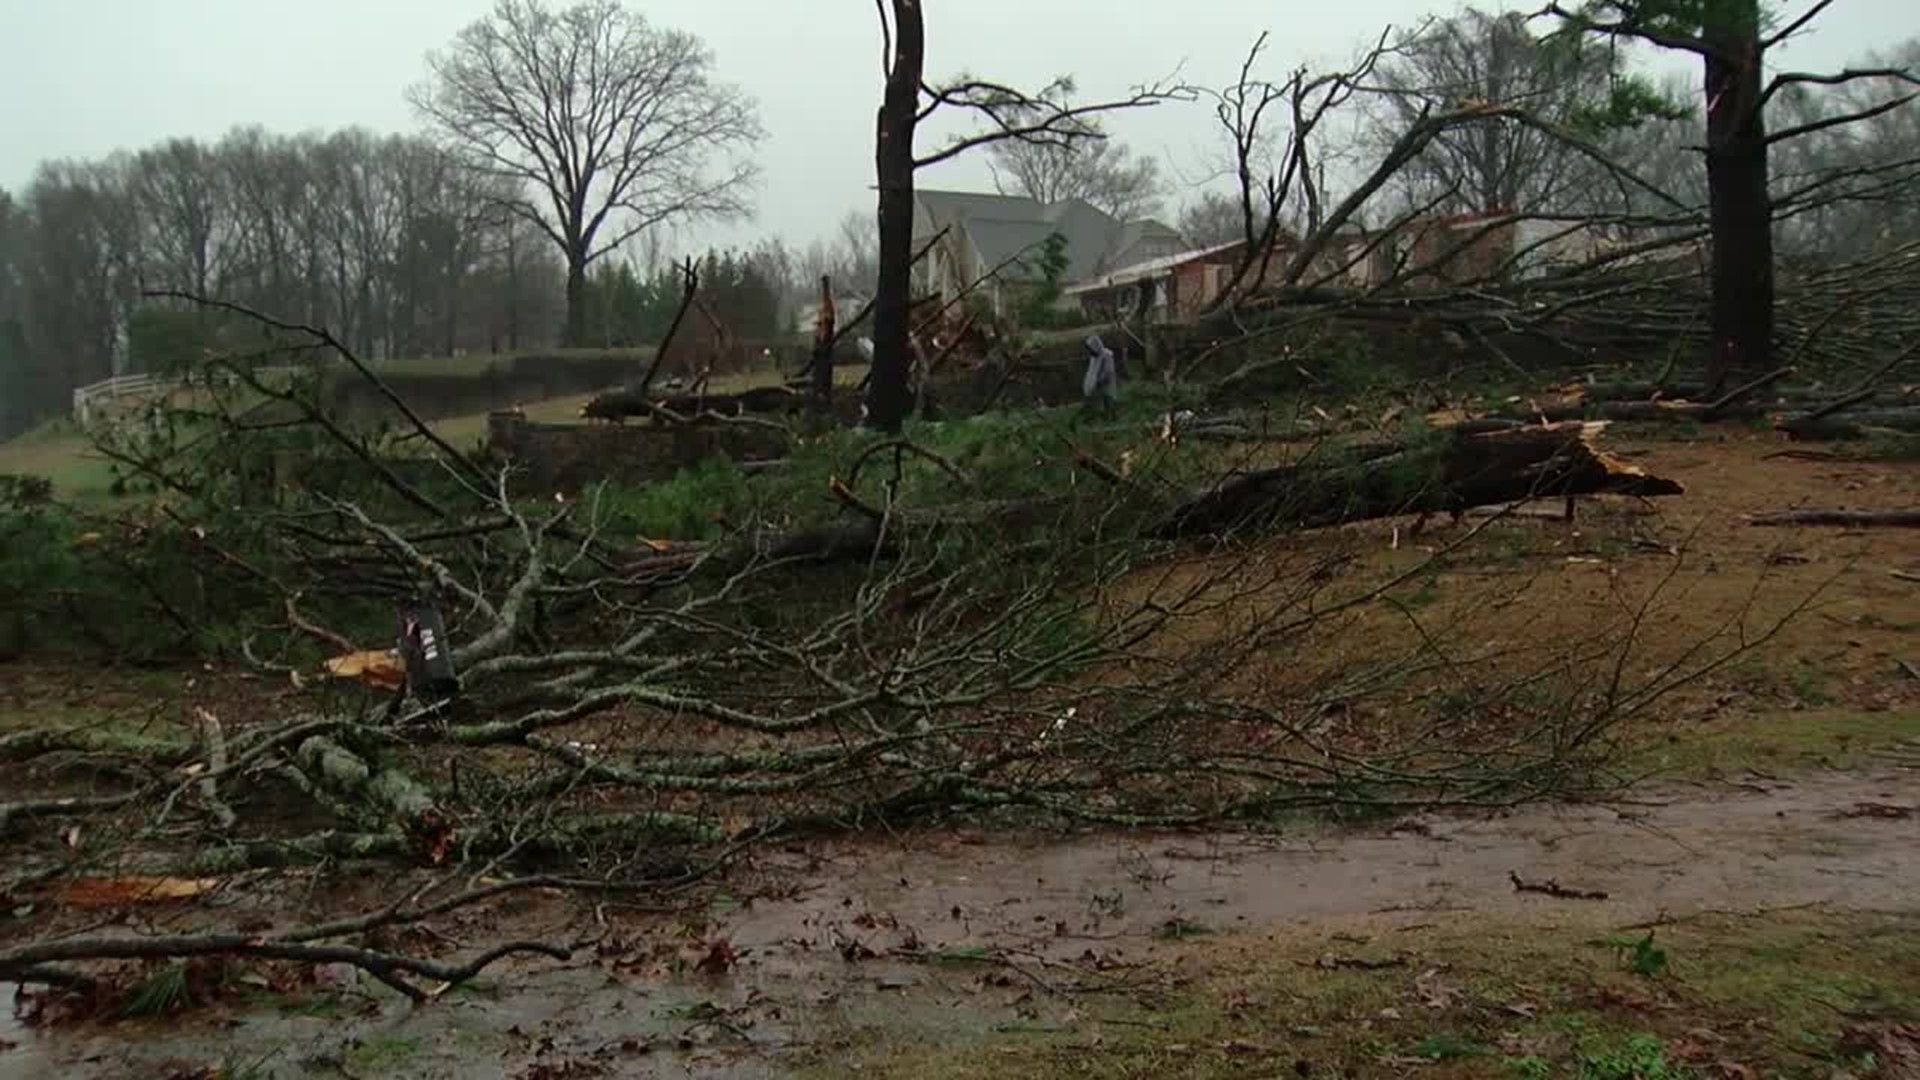 Storm damage in Love community in DeSoto County, MS